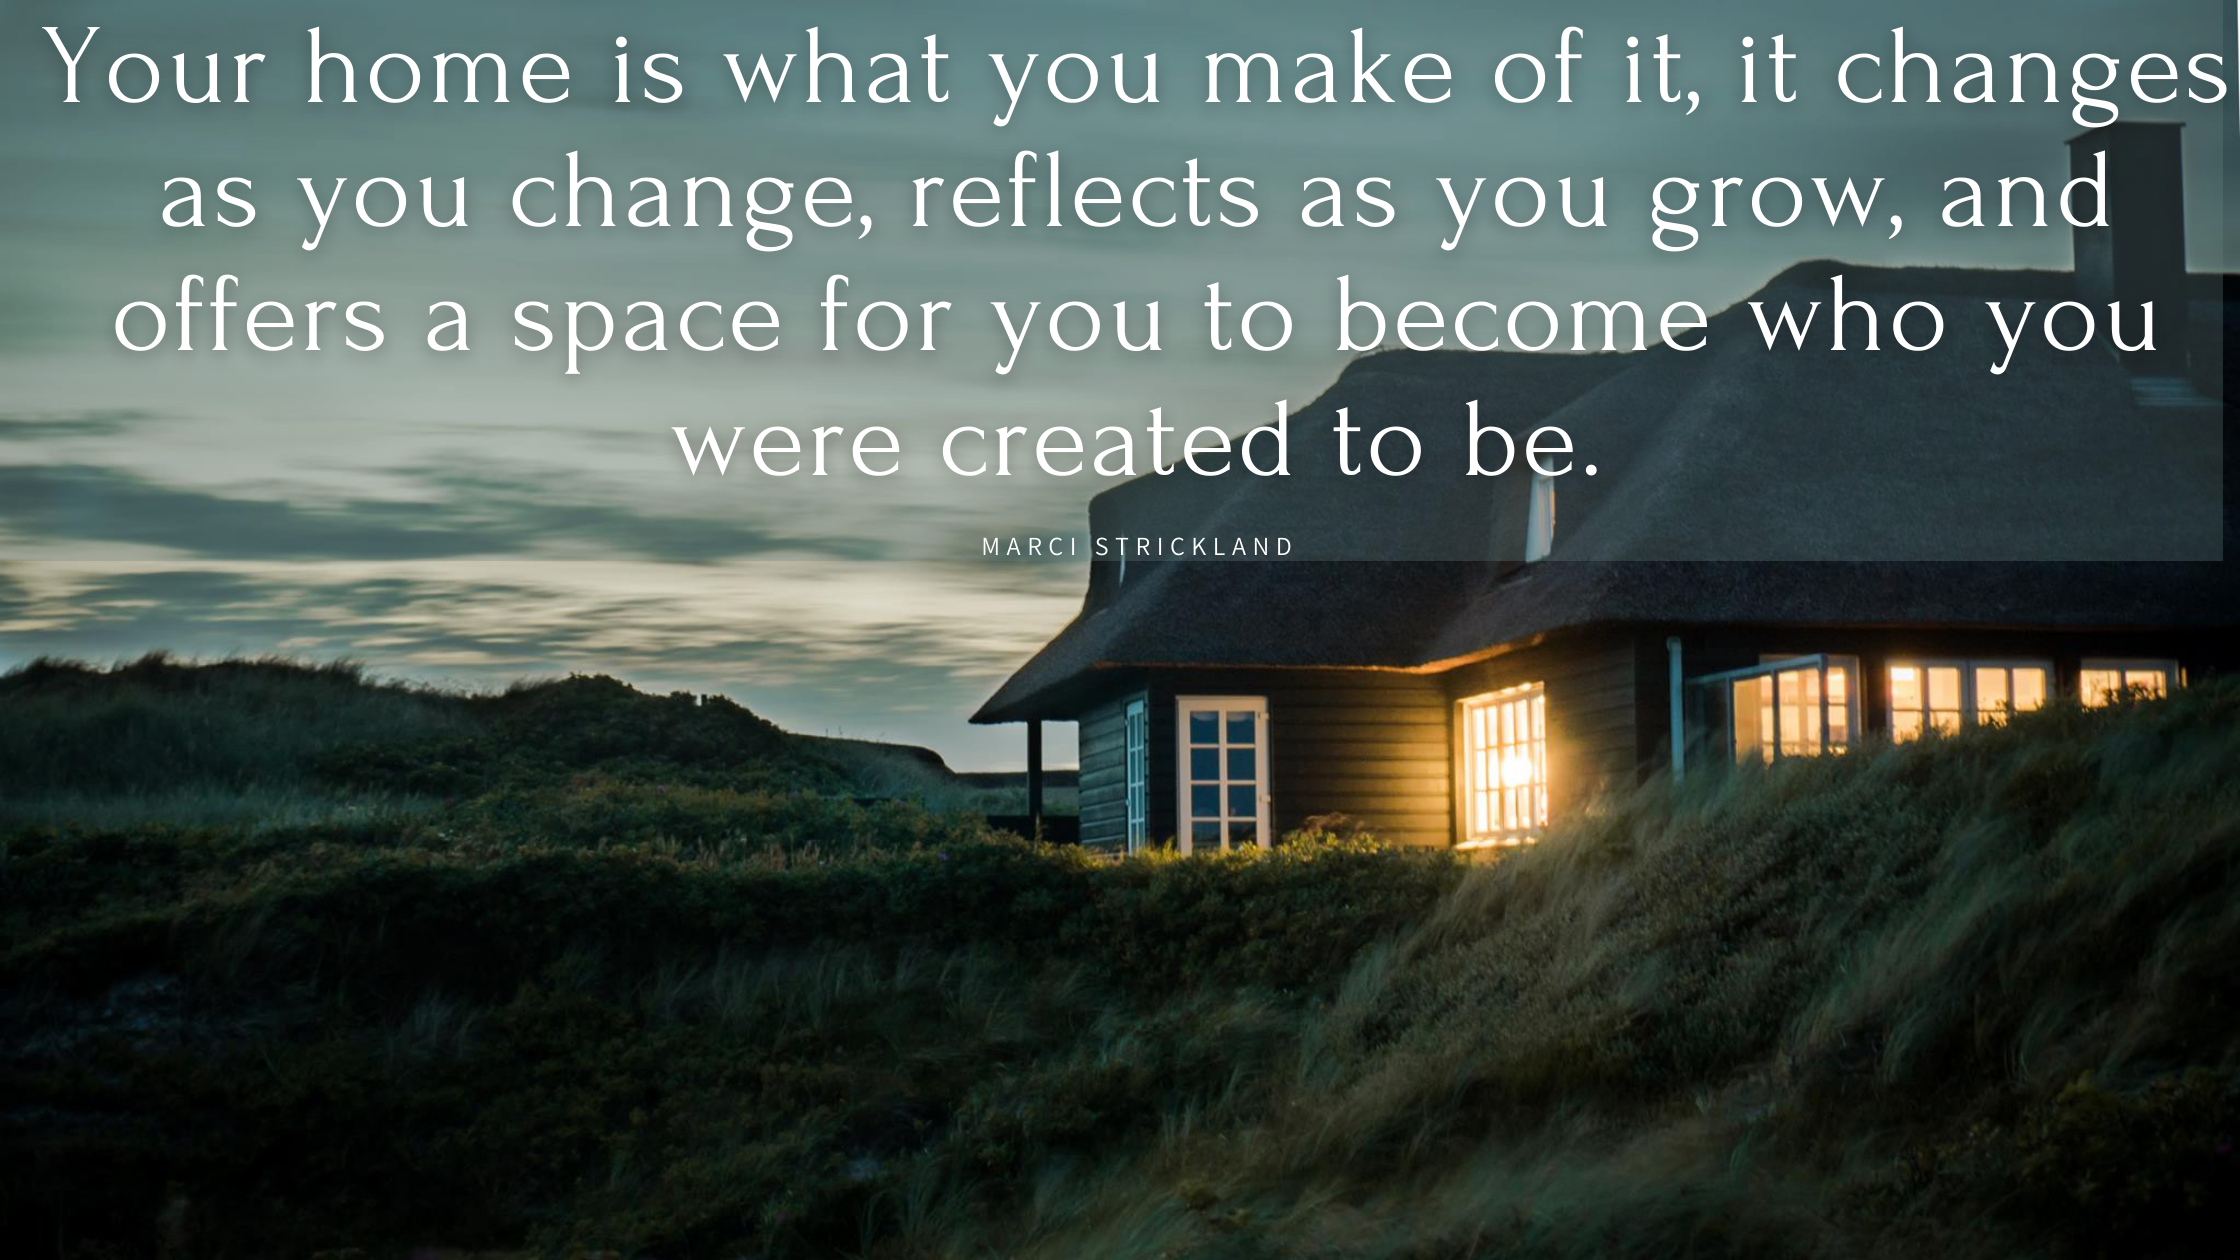 Your home is what you make of it, it changes as you change, reflects as you grow, and offers a space for you to become who you were created to be.